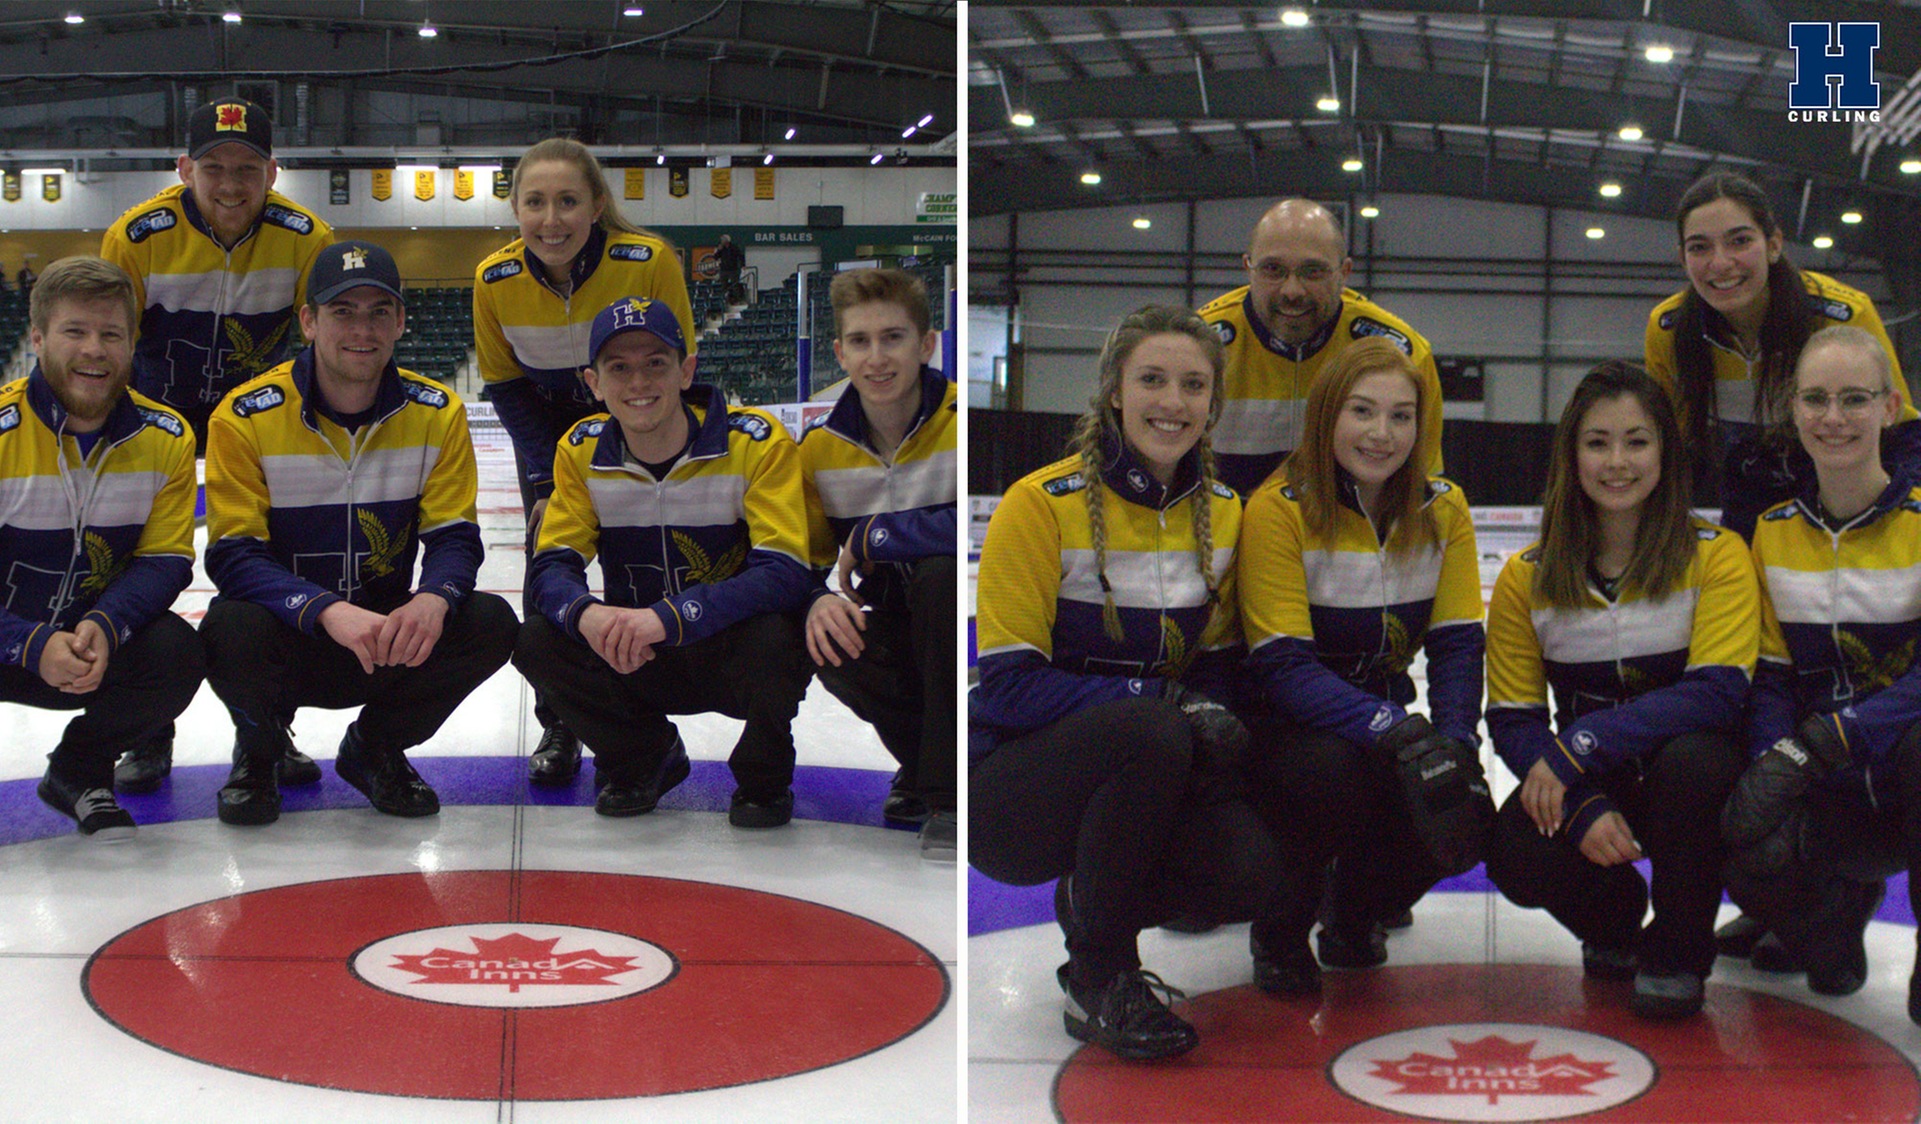 Split-screen picture of the men's and women's curling teams